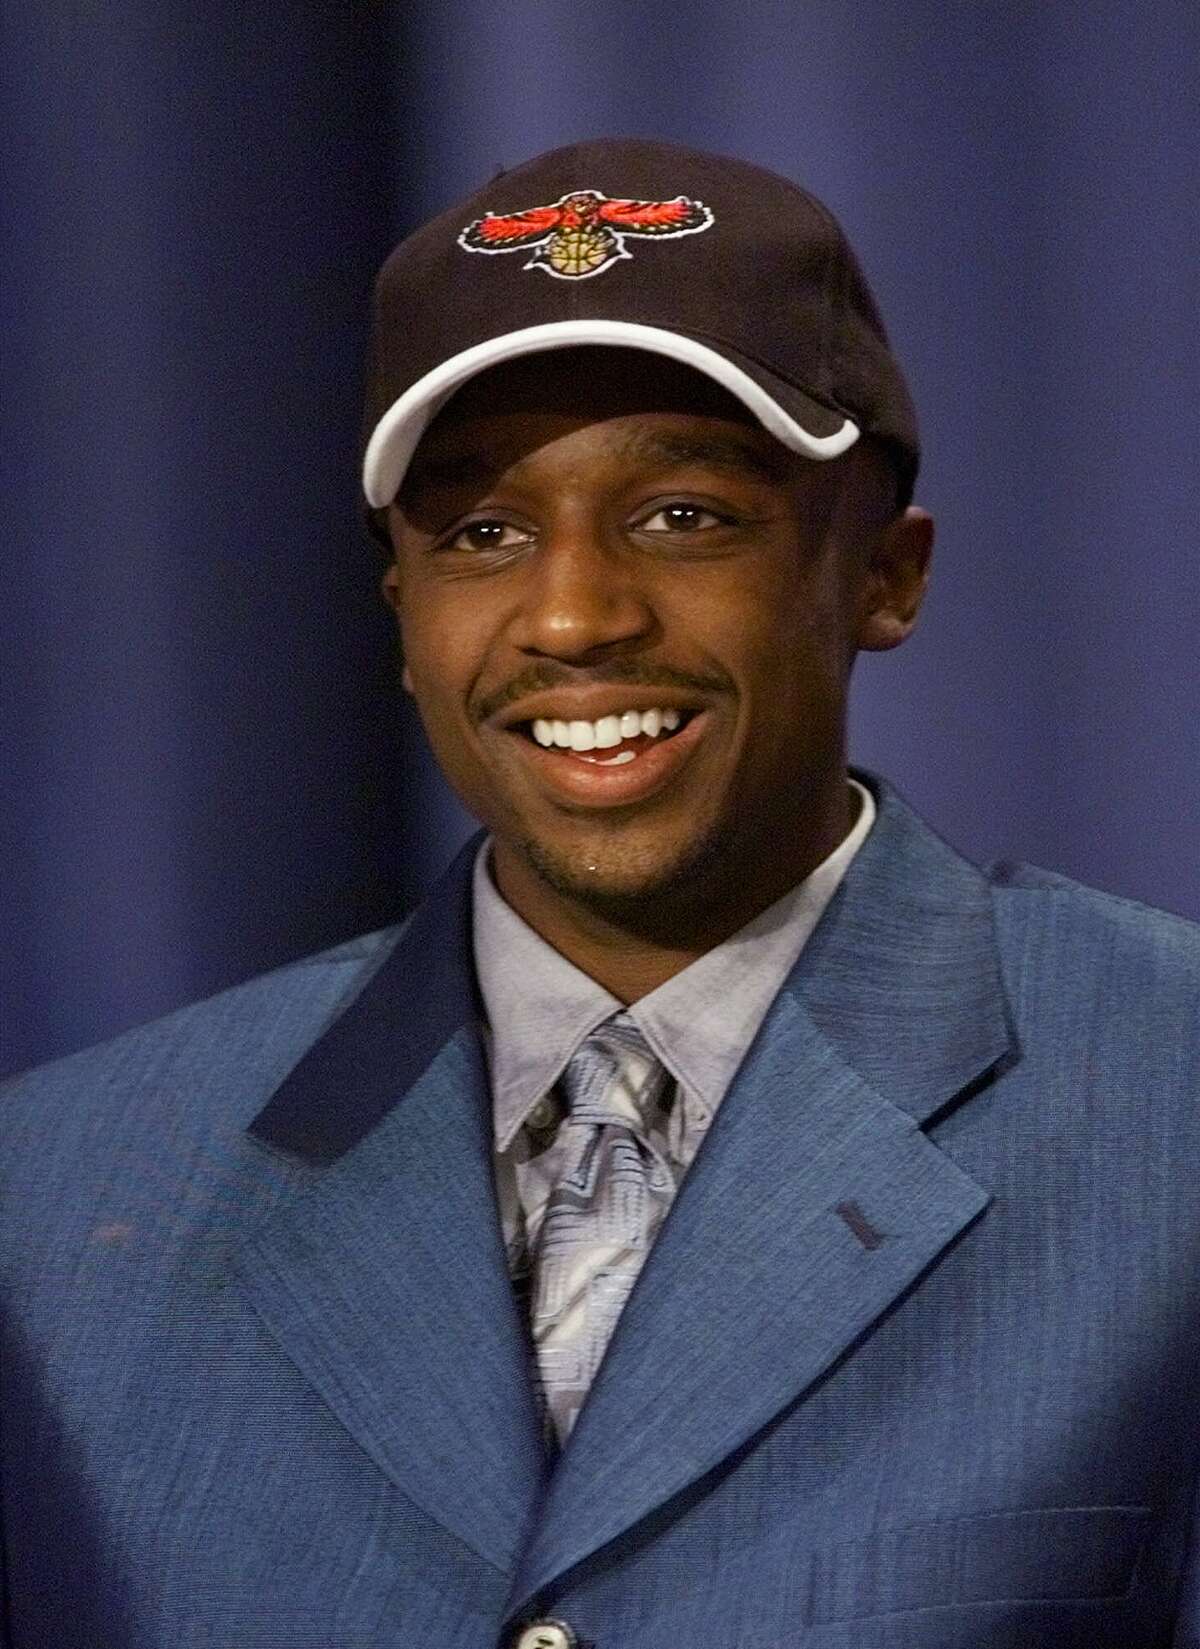 Atlanta: Jason Terry (10th overall, 1999) The Hawks' draft history isn't exactly littered with inspired selections, but Terry at No. 10 in 1999 was a good choice. He's enjoyed a long, solid career, especially after being traded to Dallas in 2004.